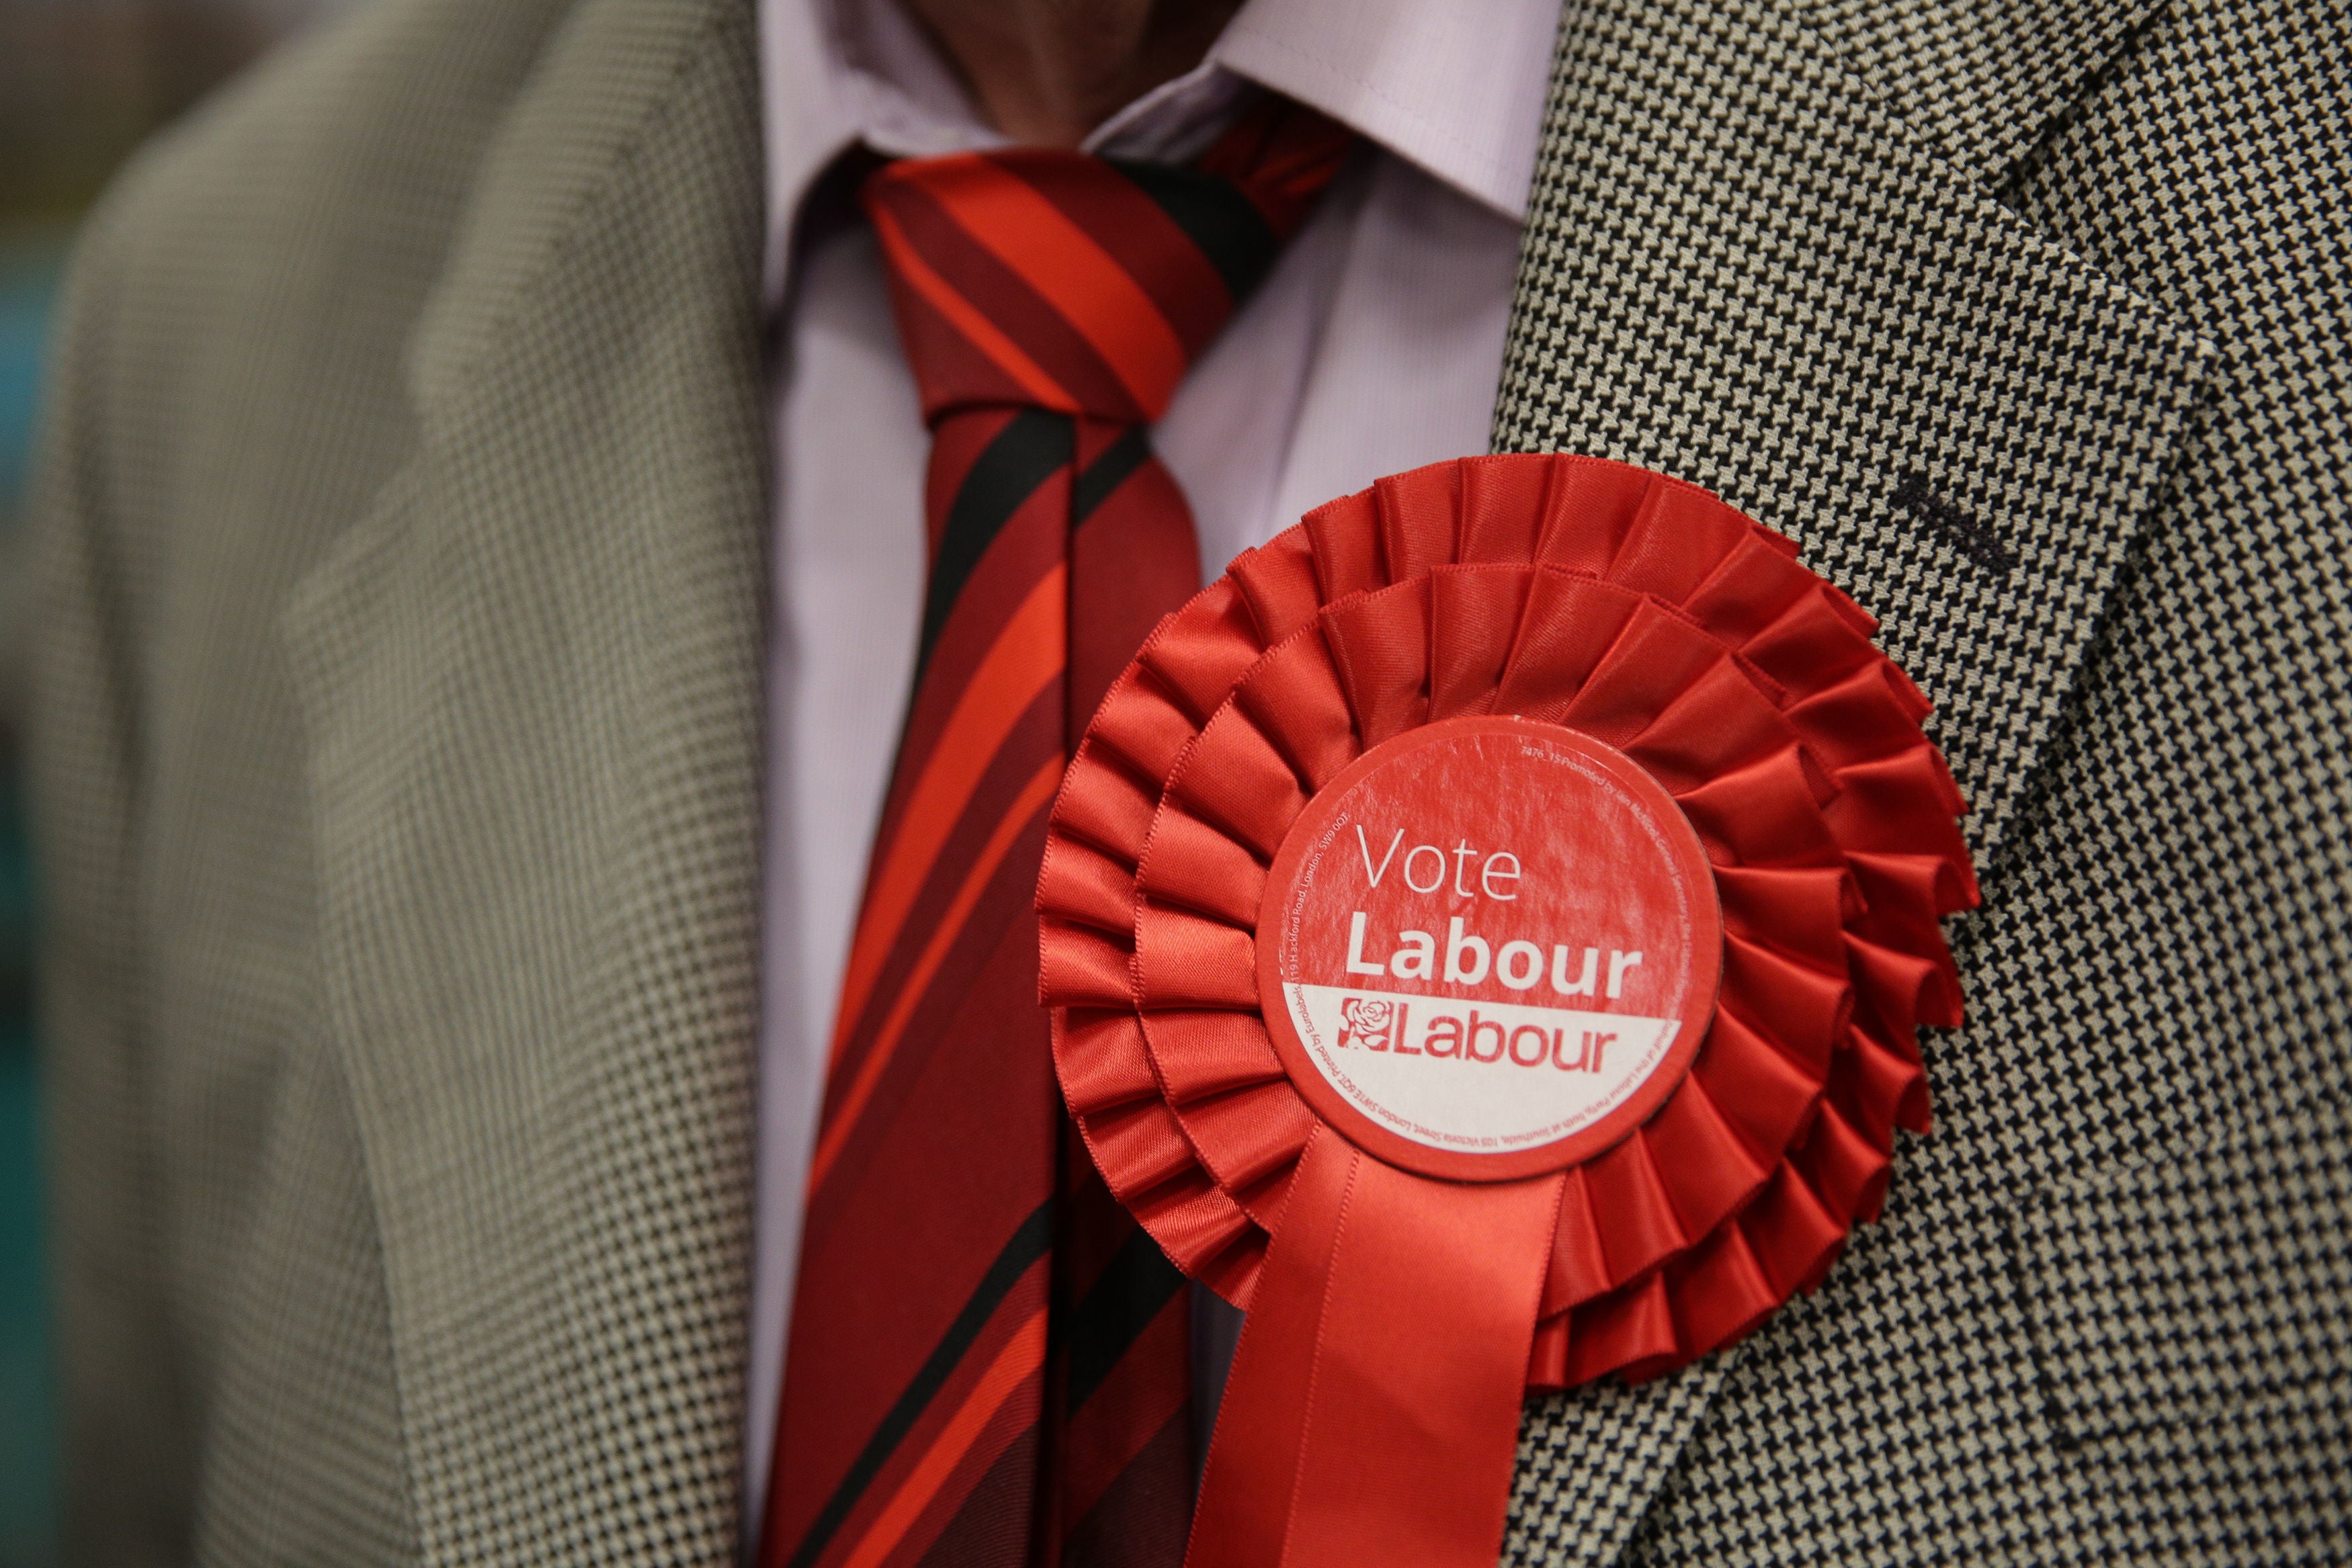 A Labour spokesperson said the party takes any allegations of discrimination received extremely seriously